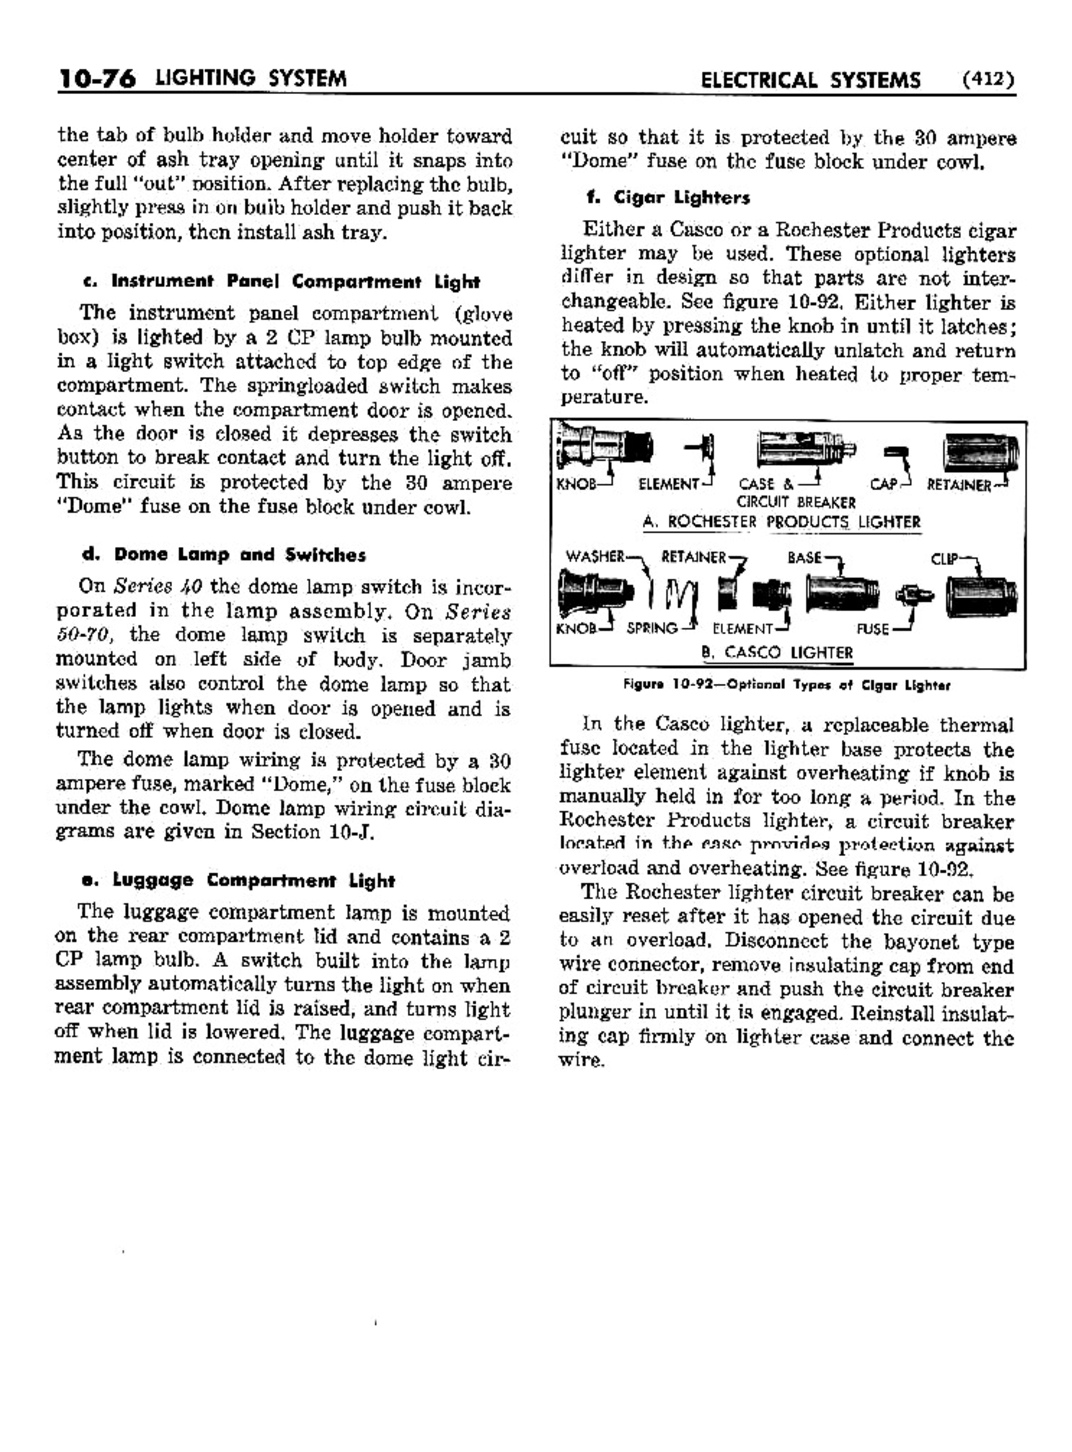 n_11 1952 Buick Shop Manual - Electrical Systems-076-076.jpg